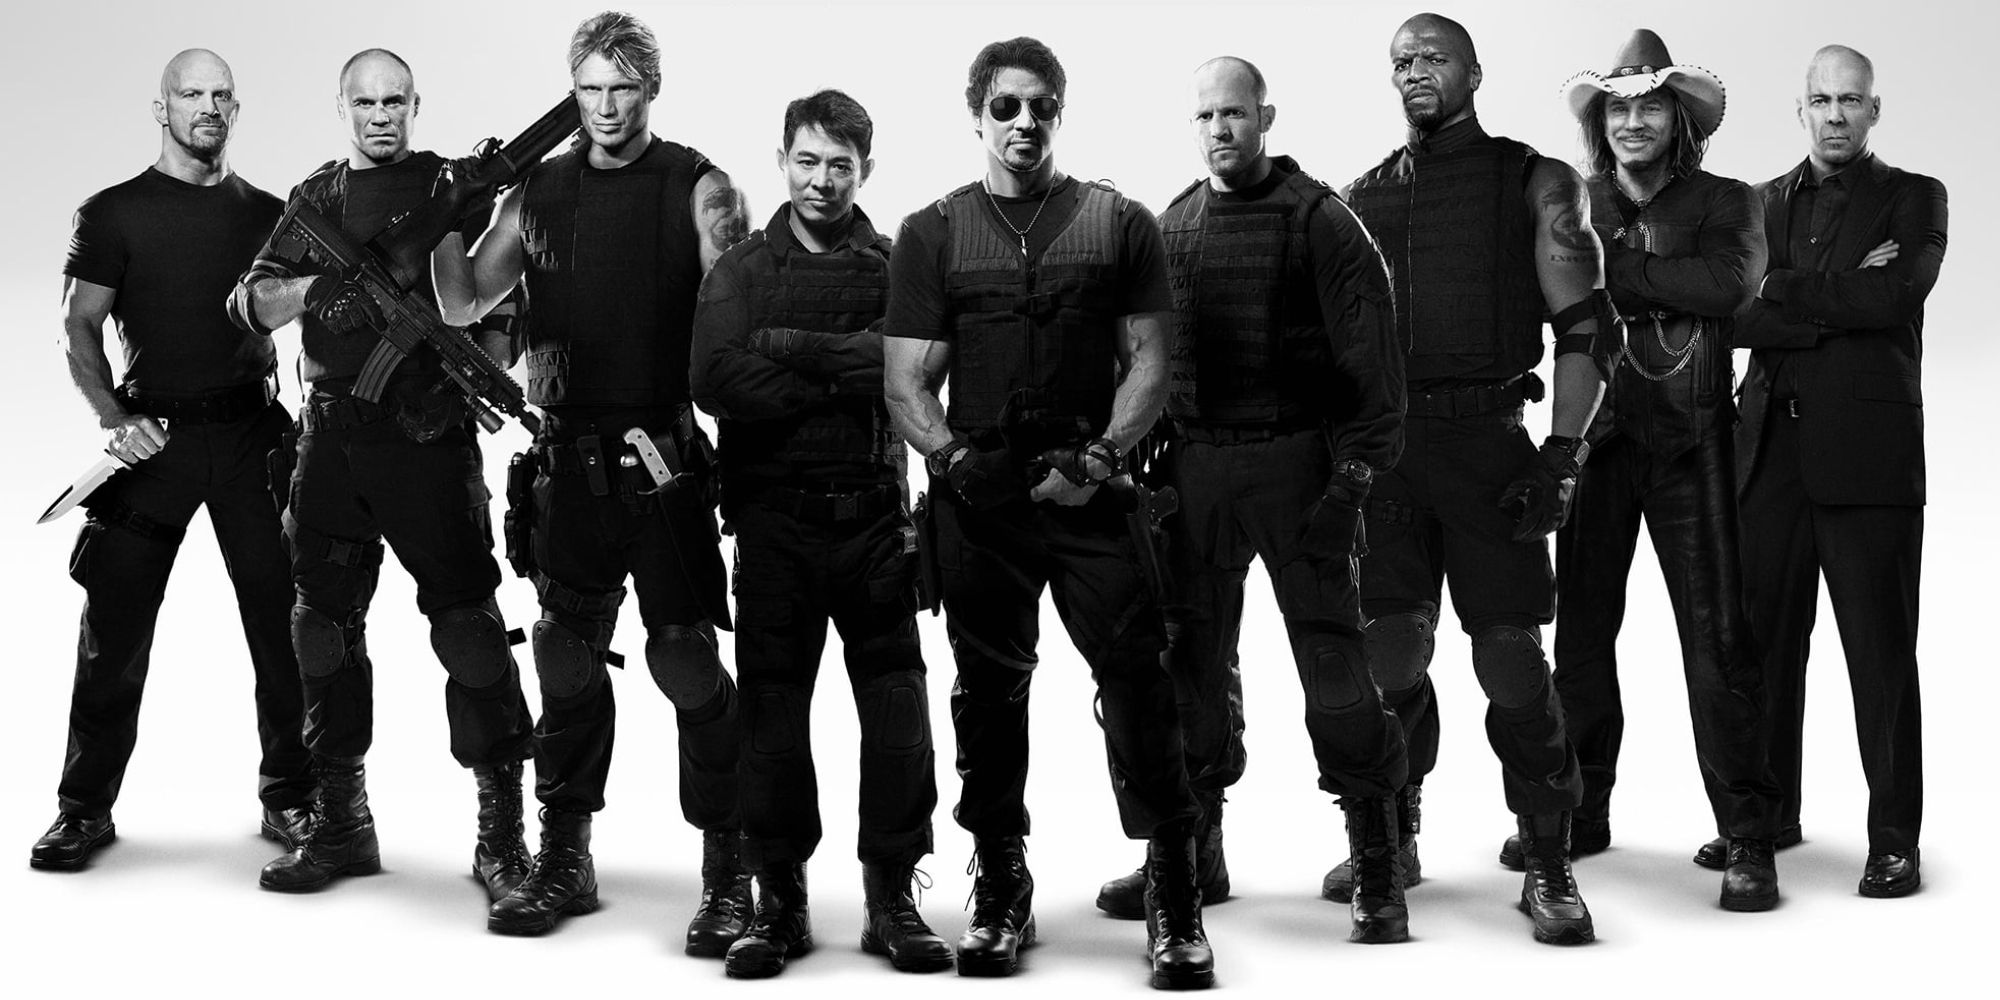 The Expendables Cast